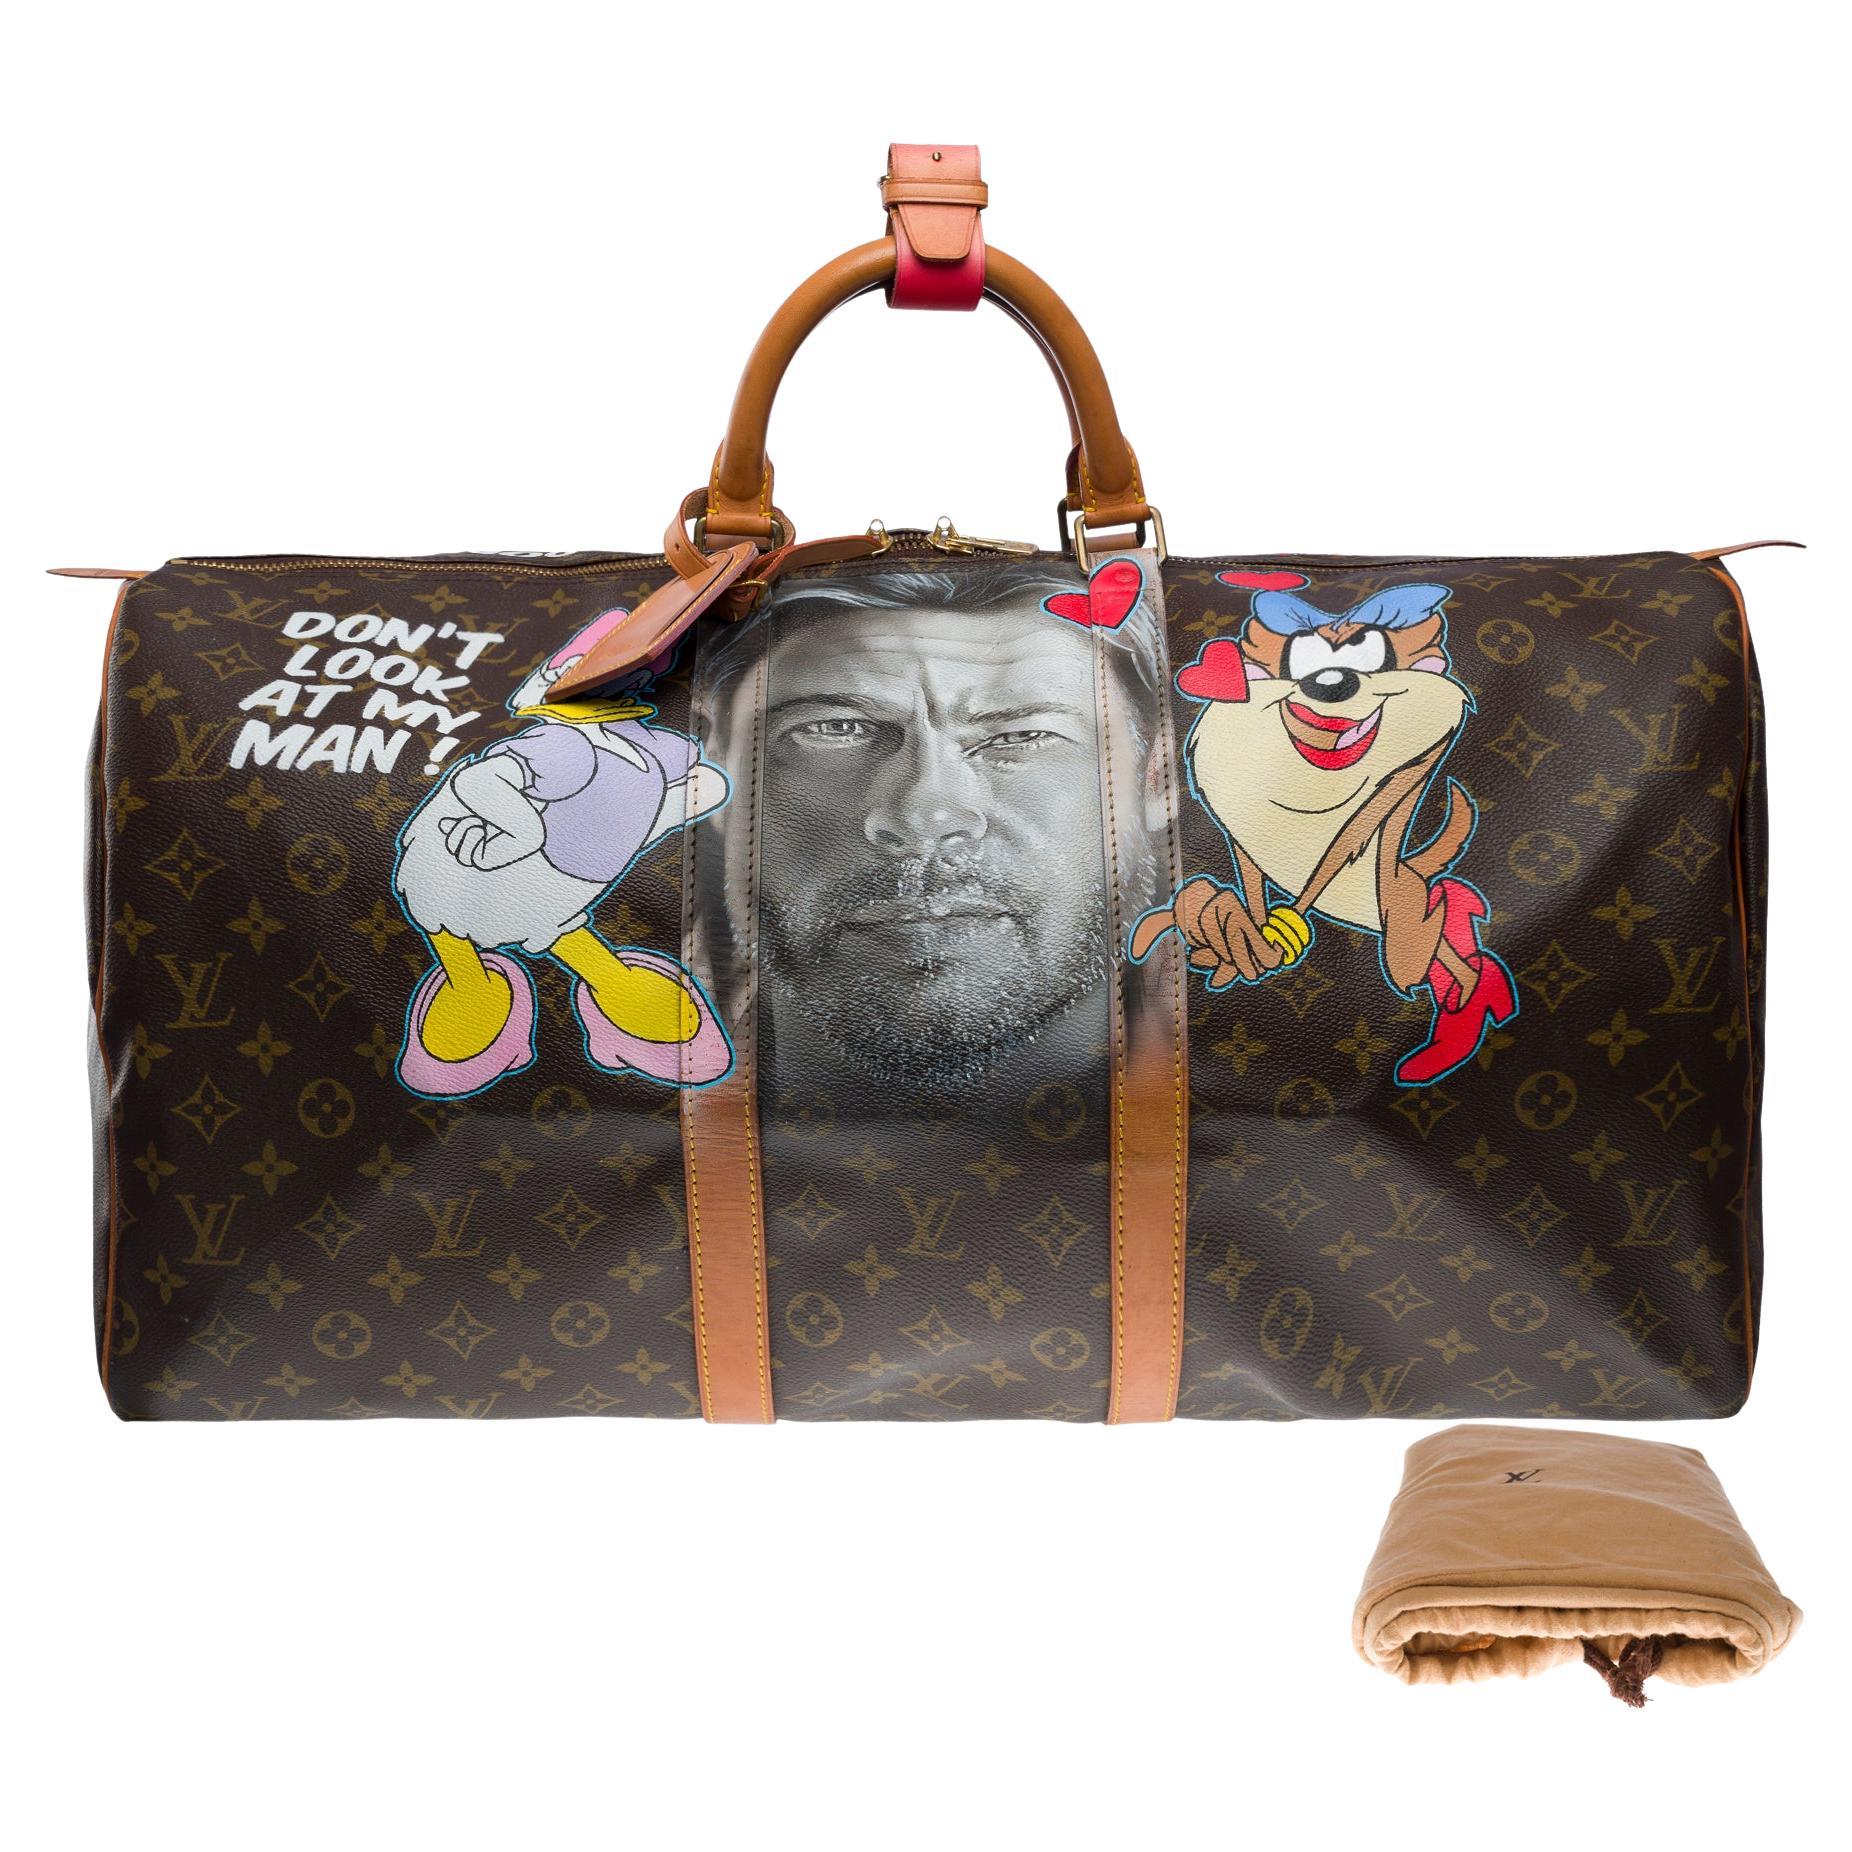 What is the biggest Louis Vuitton keepall?